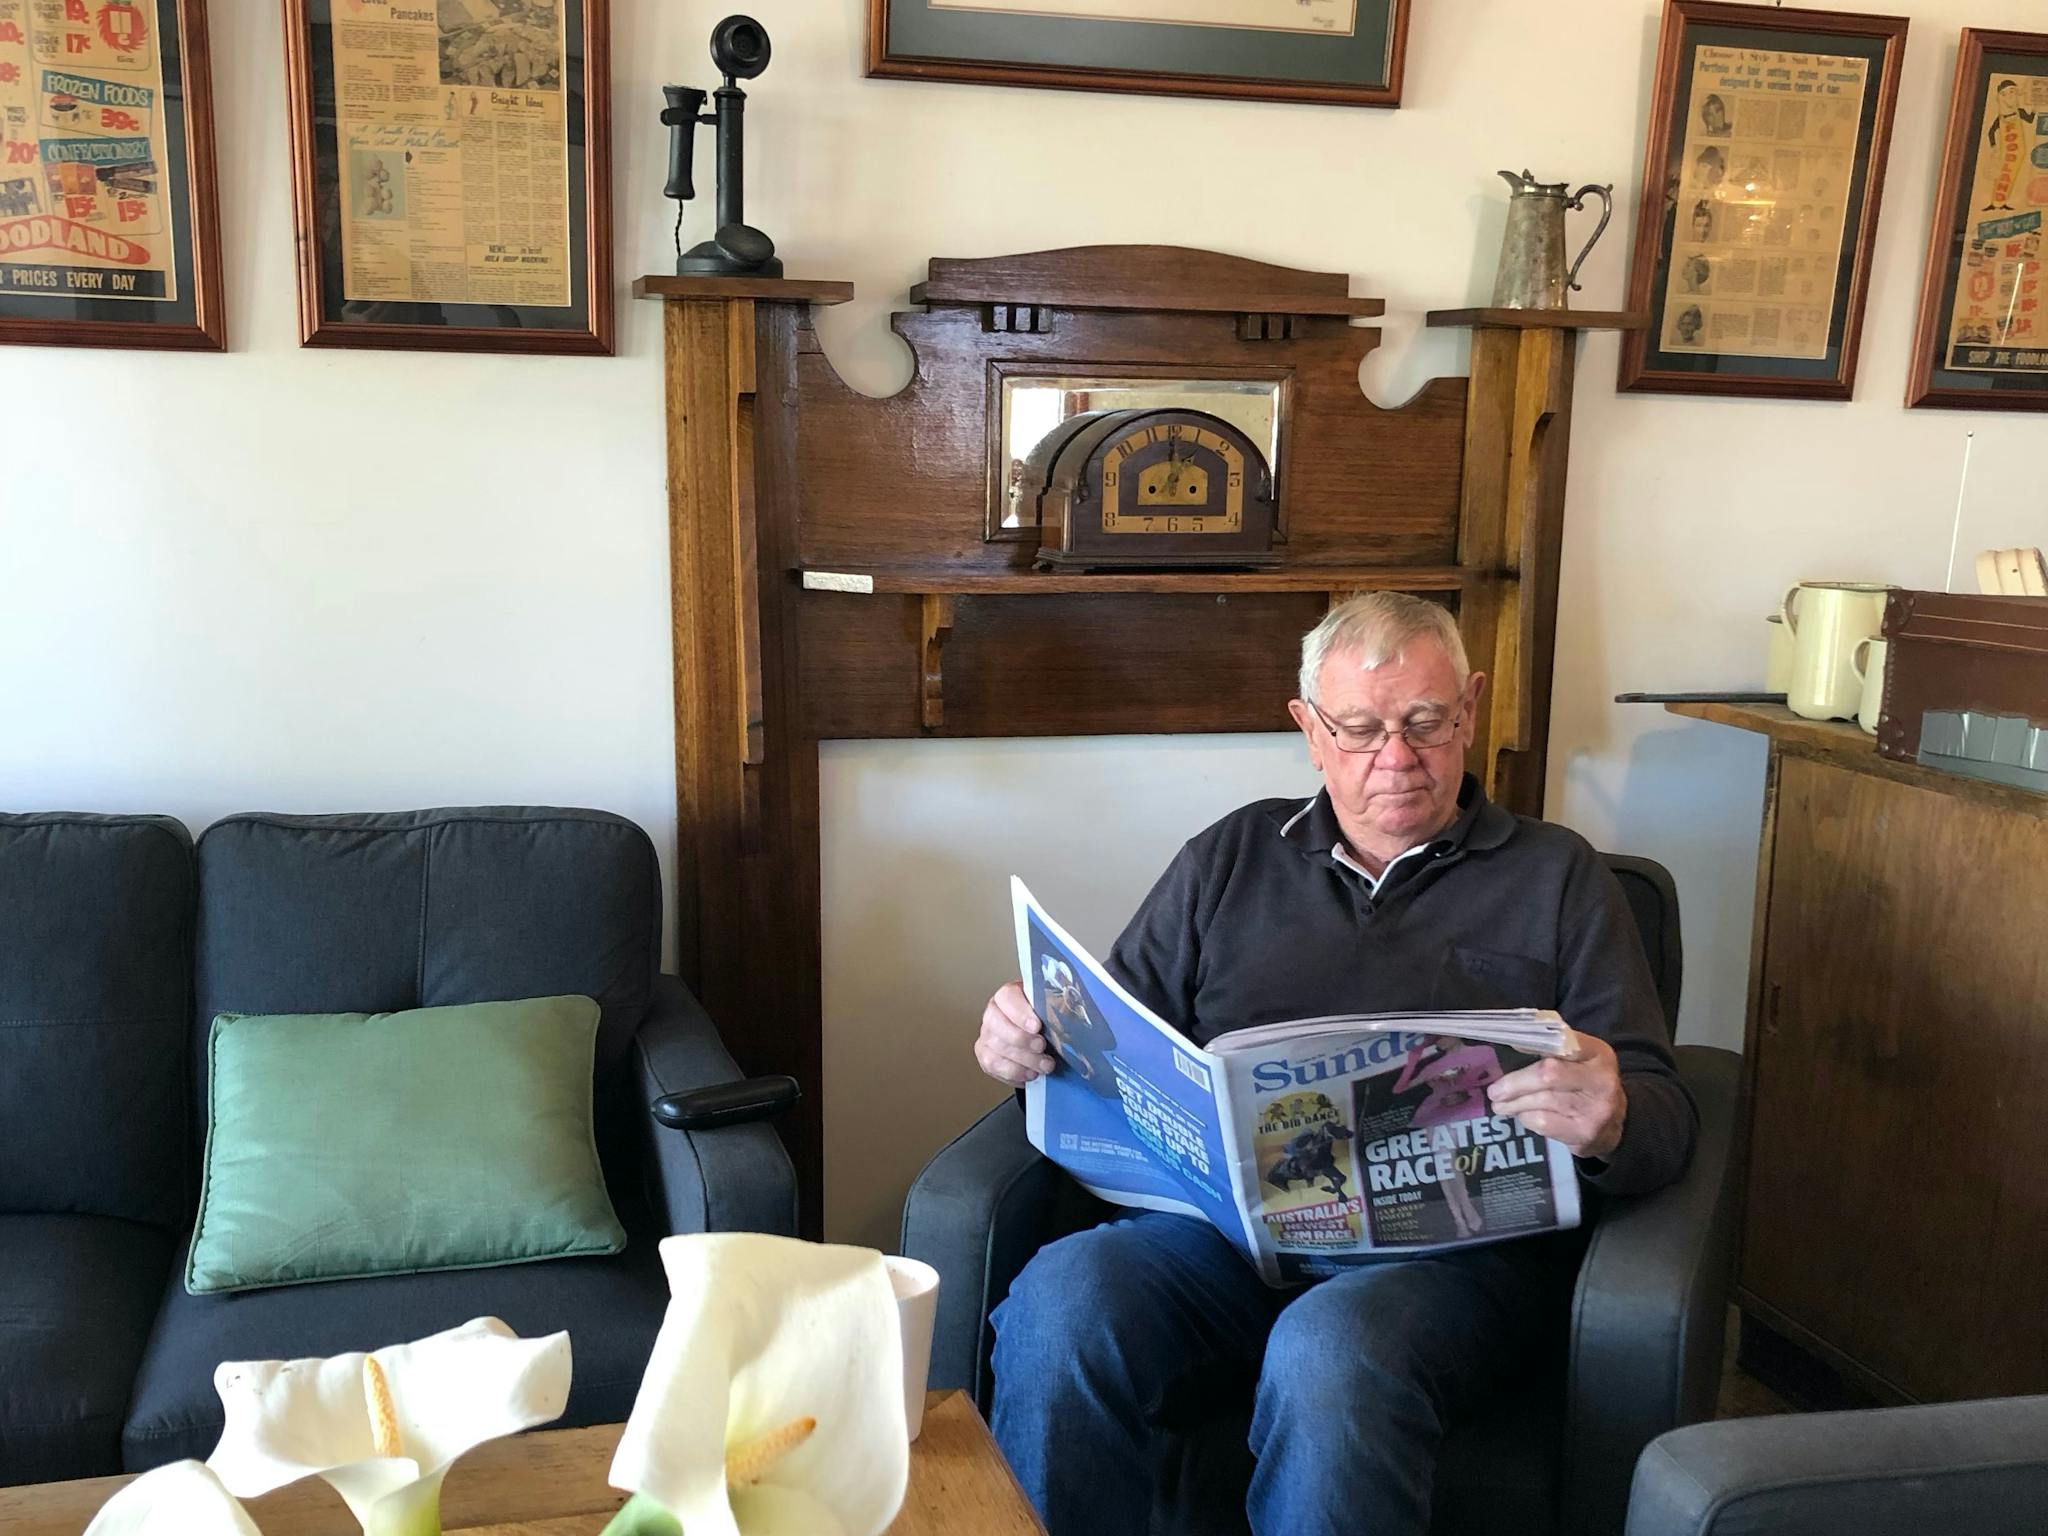 Man reading a newspaper on an easy chair.